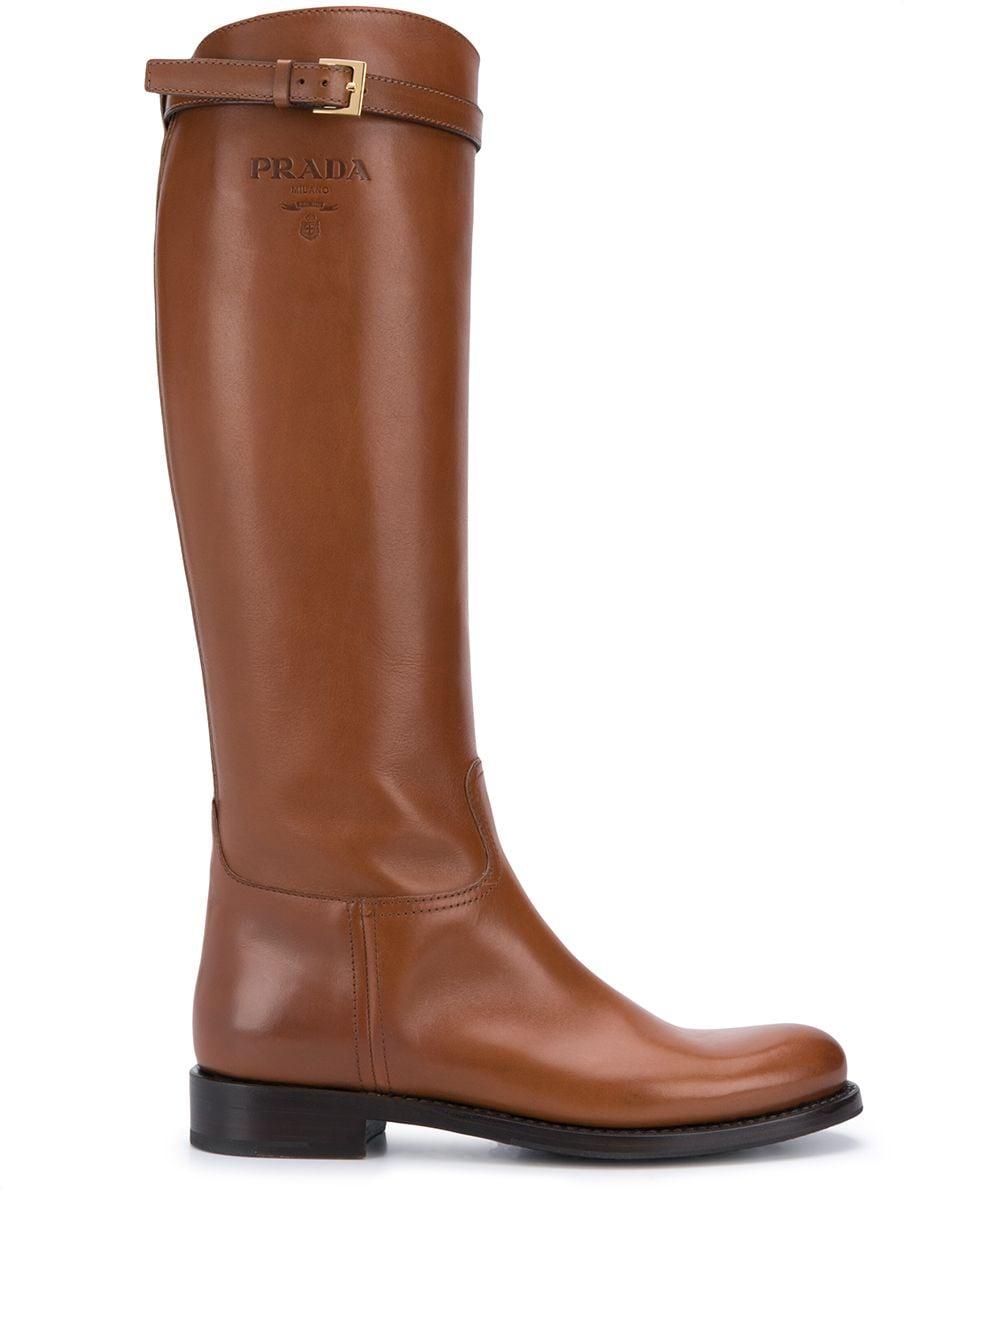 Rich and Rugged: Brown Leather Prada Boots for Women